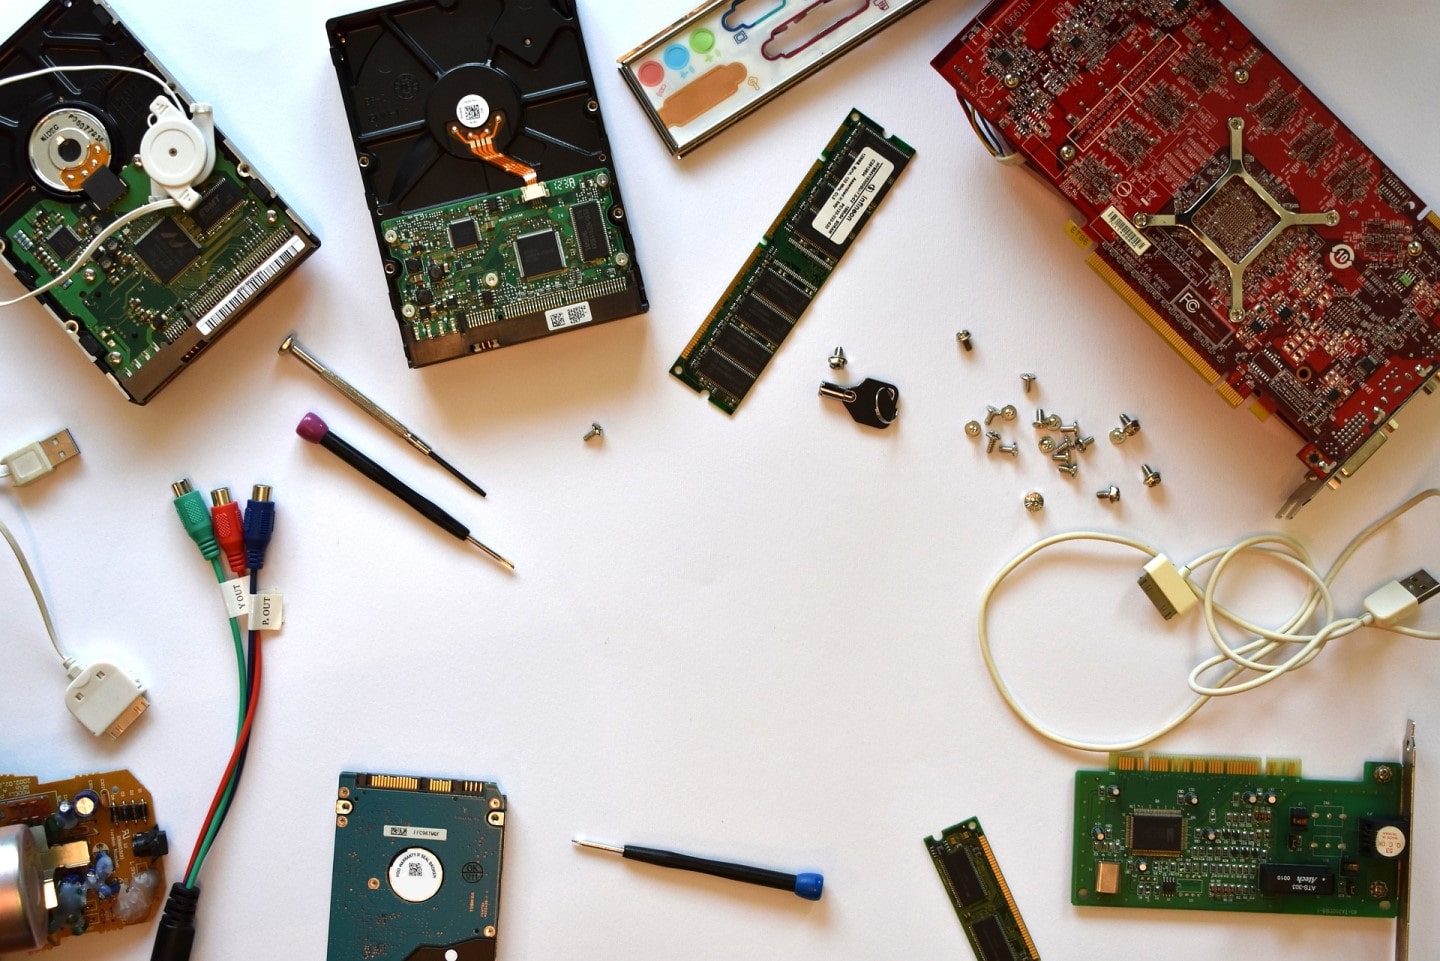 Ensure all hardware components are properly connected.
Check for any damaged or faulty hardware.